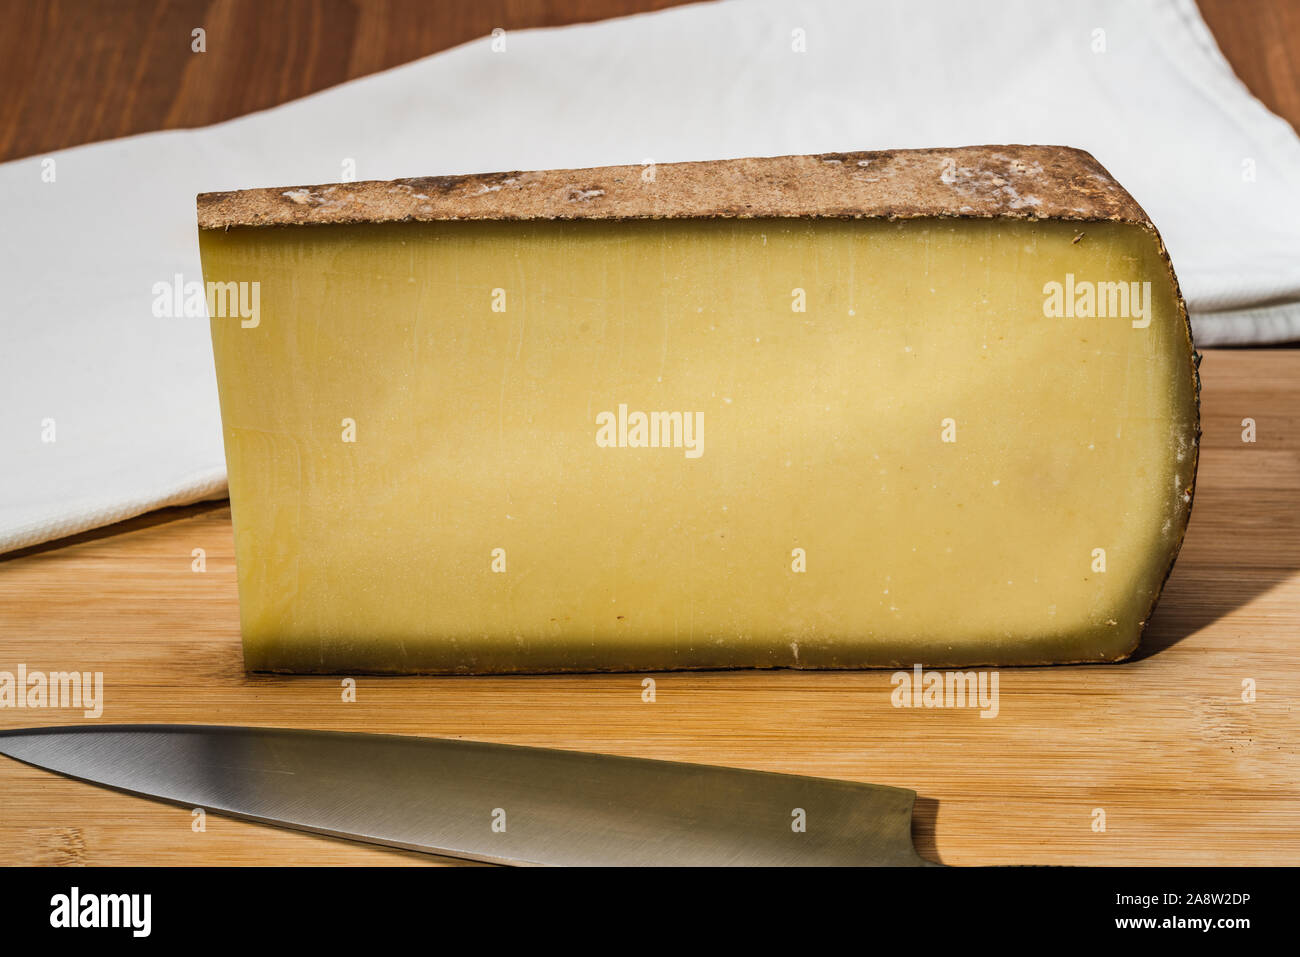 Comte an aged French cheese made from unpasteurized cow's milk Stock Photo